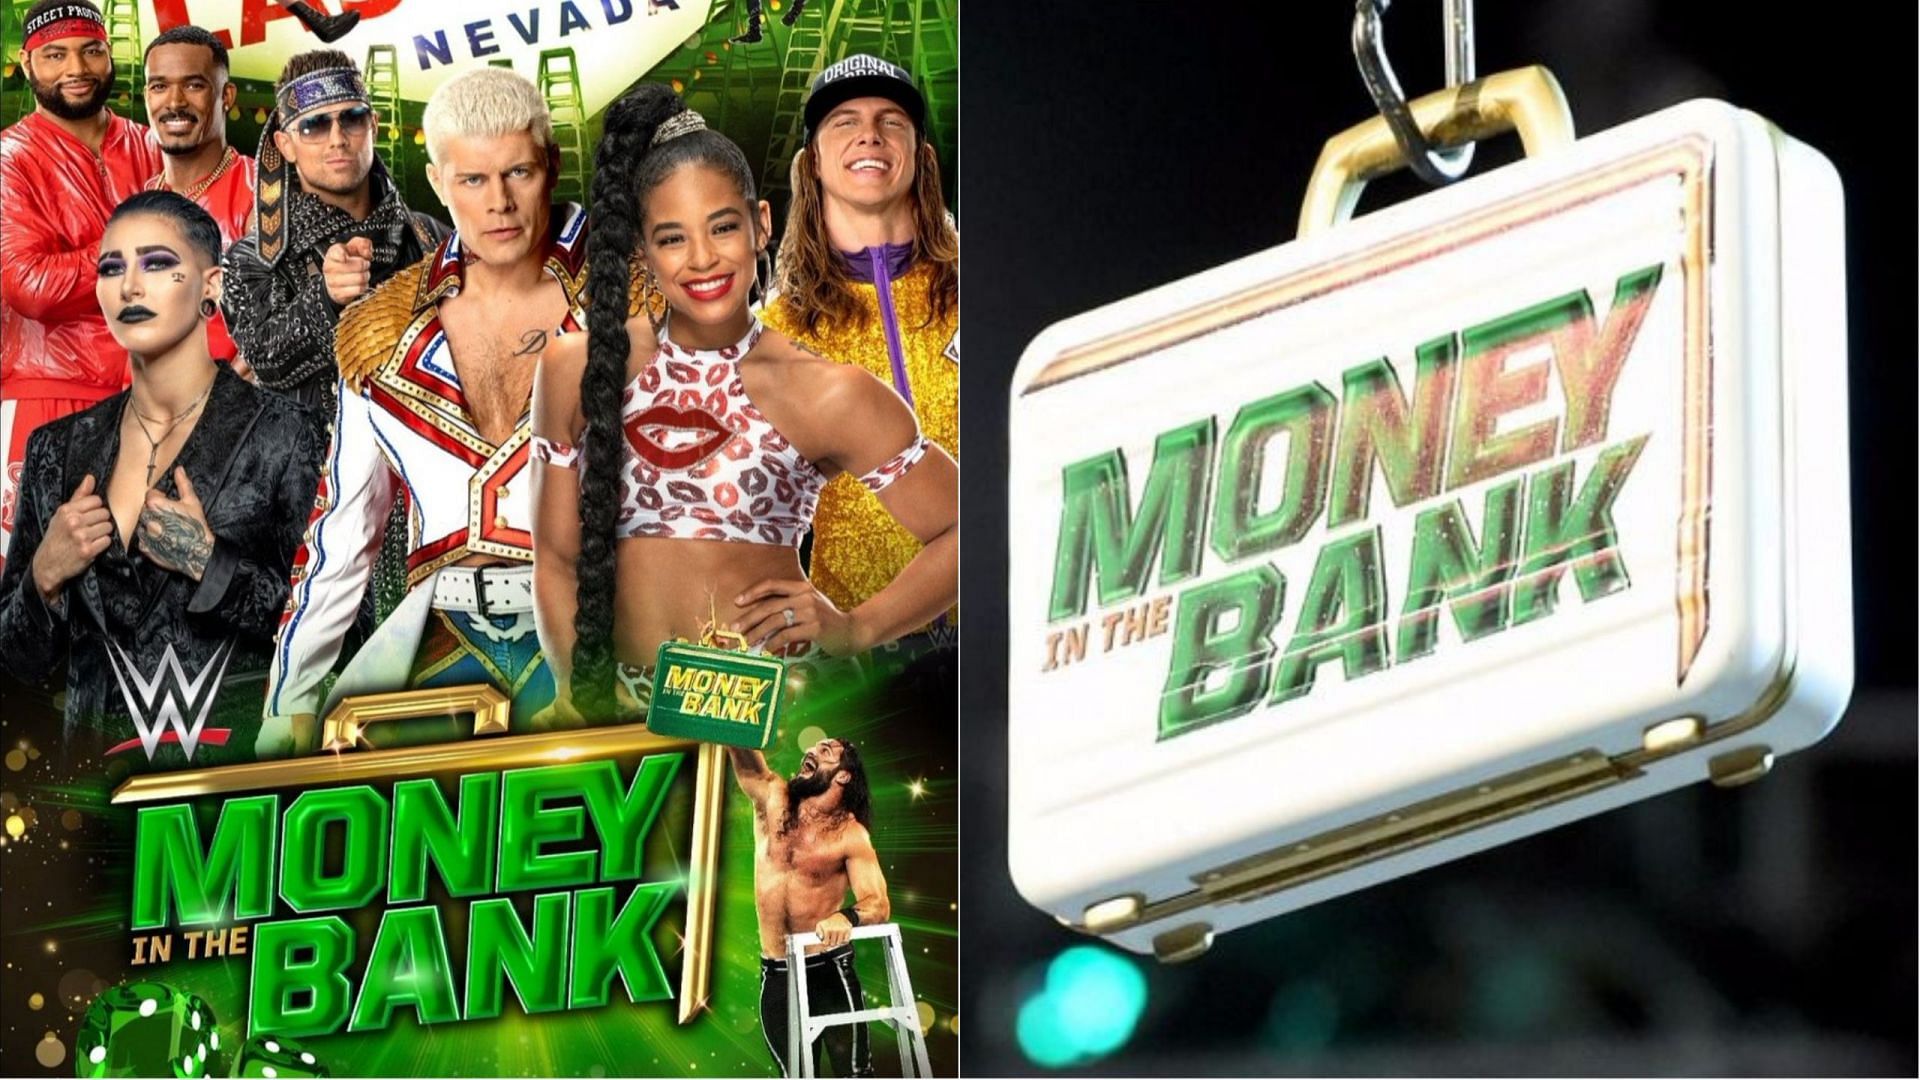 Who will win the Money in the Bank matches this year?